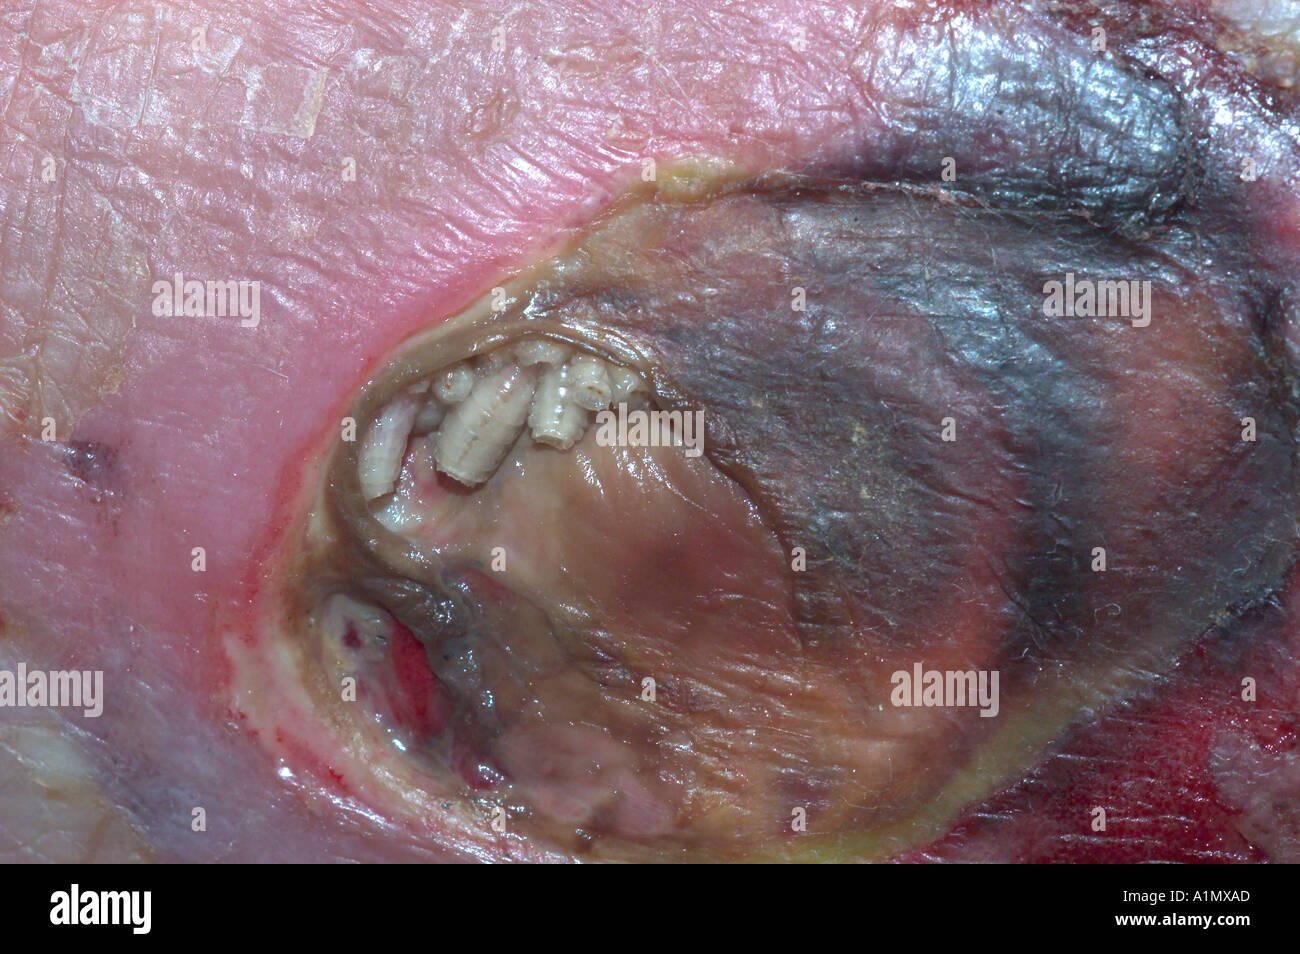 fly maggots found in ankle wound ulcer of elderly male Stock Photo